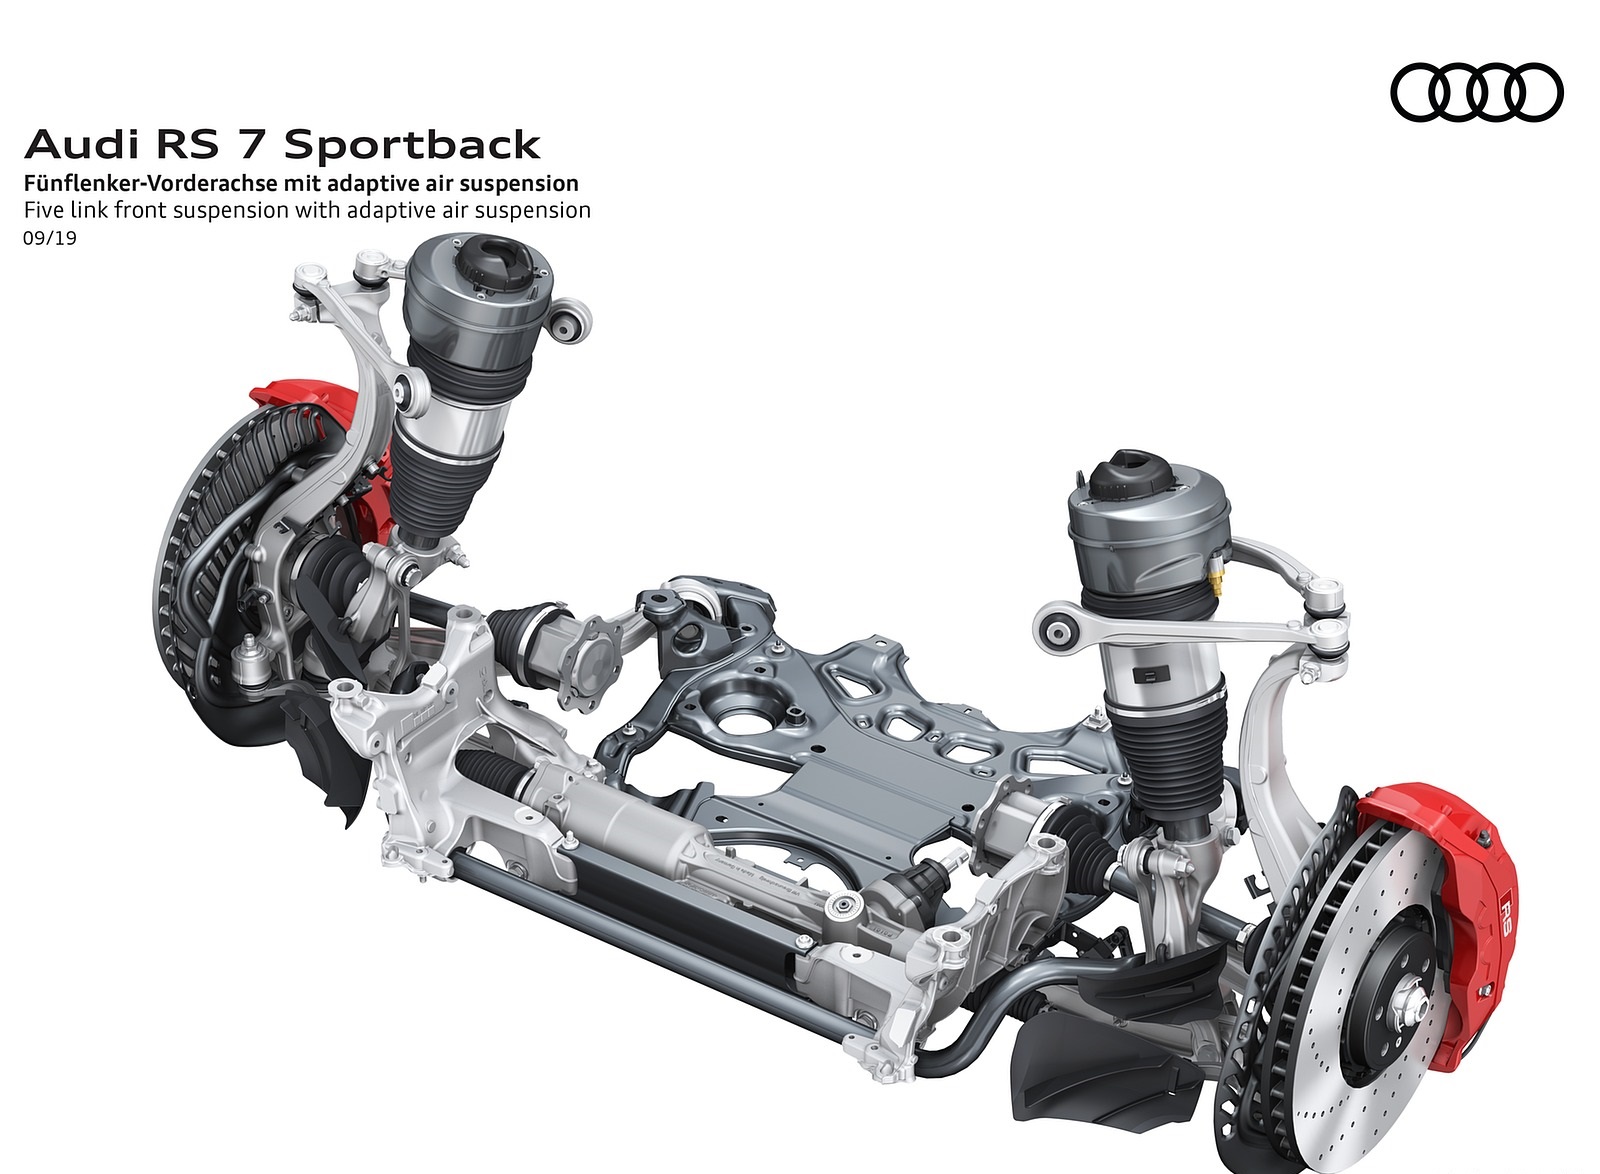 2020 Audi RS 7 Sportback Five link front suspension with adaptive air suspension Wallpapers #95 of 99